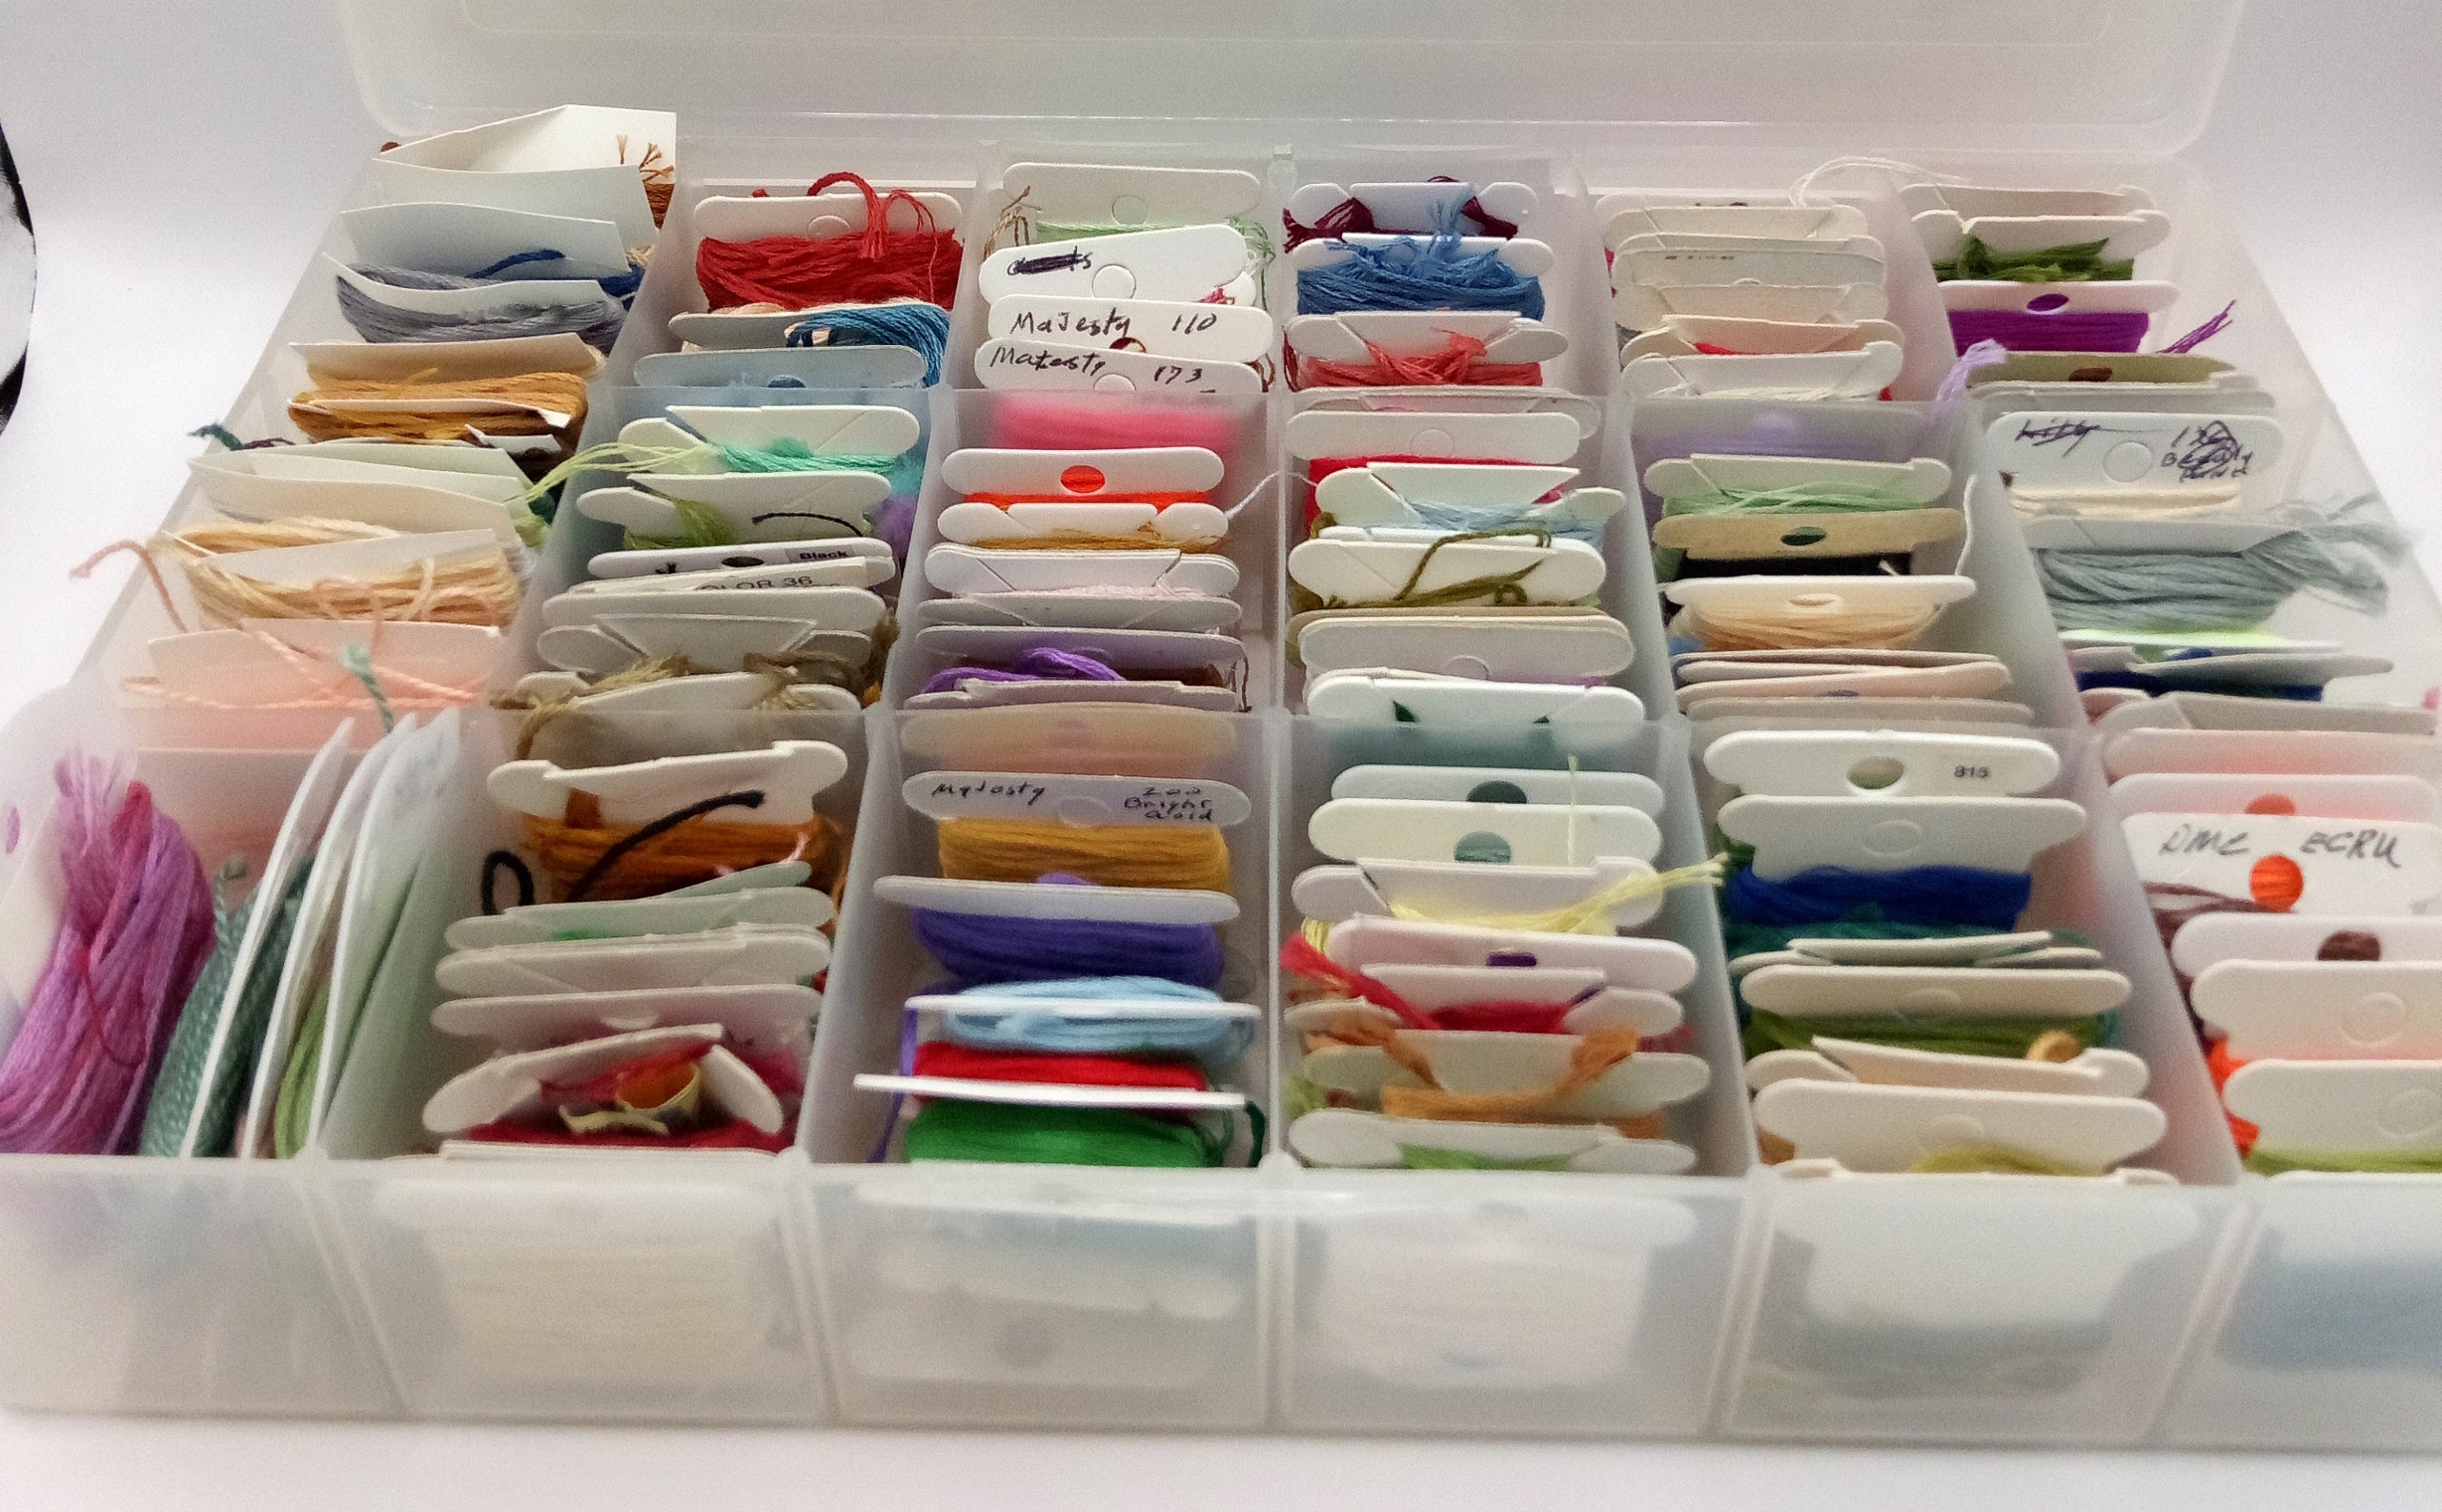 Embroidery Floss Small Crafts & Toys New brothread Double-Sided Storage Organizer/Box with Total 48 Adjustable Compartments Needles Removable Dividers for Embroidery and Sewing Threads Beads 